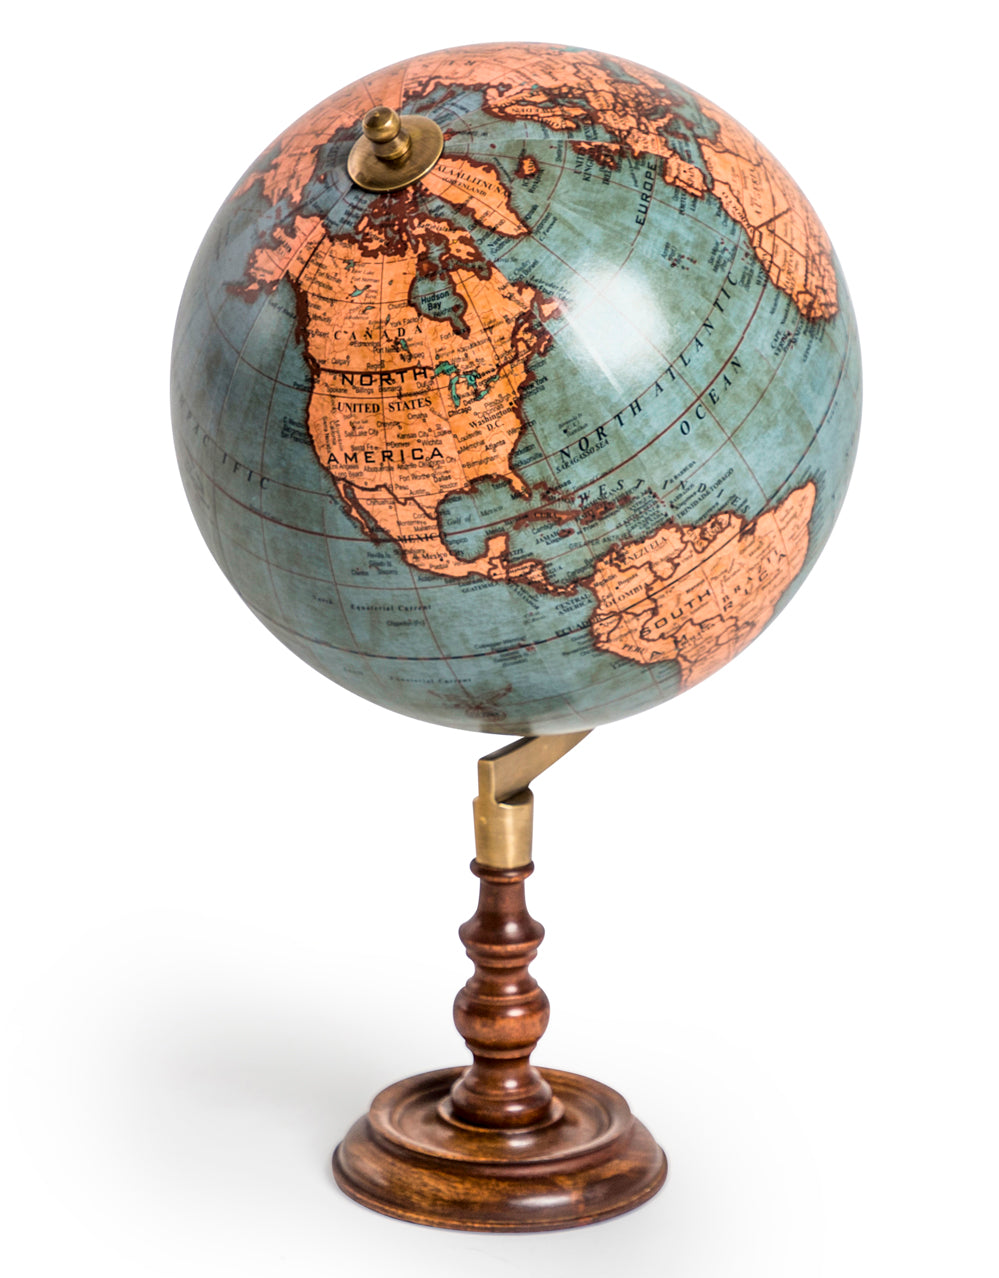 Antique Globe on Wooden Stand Ornament